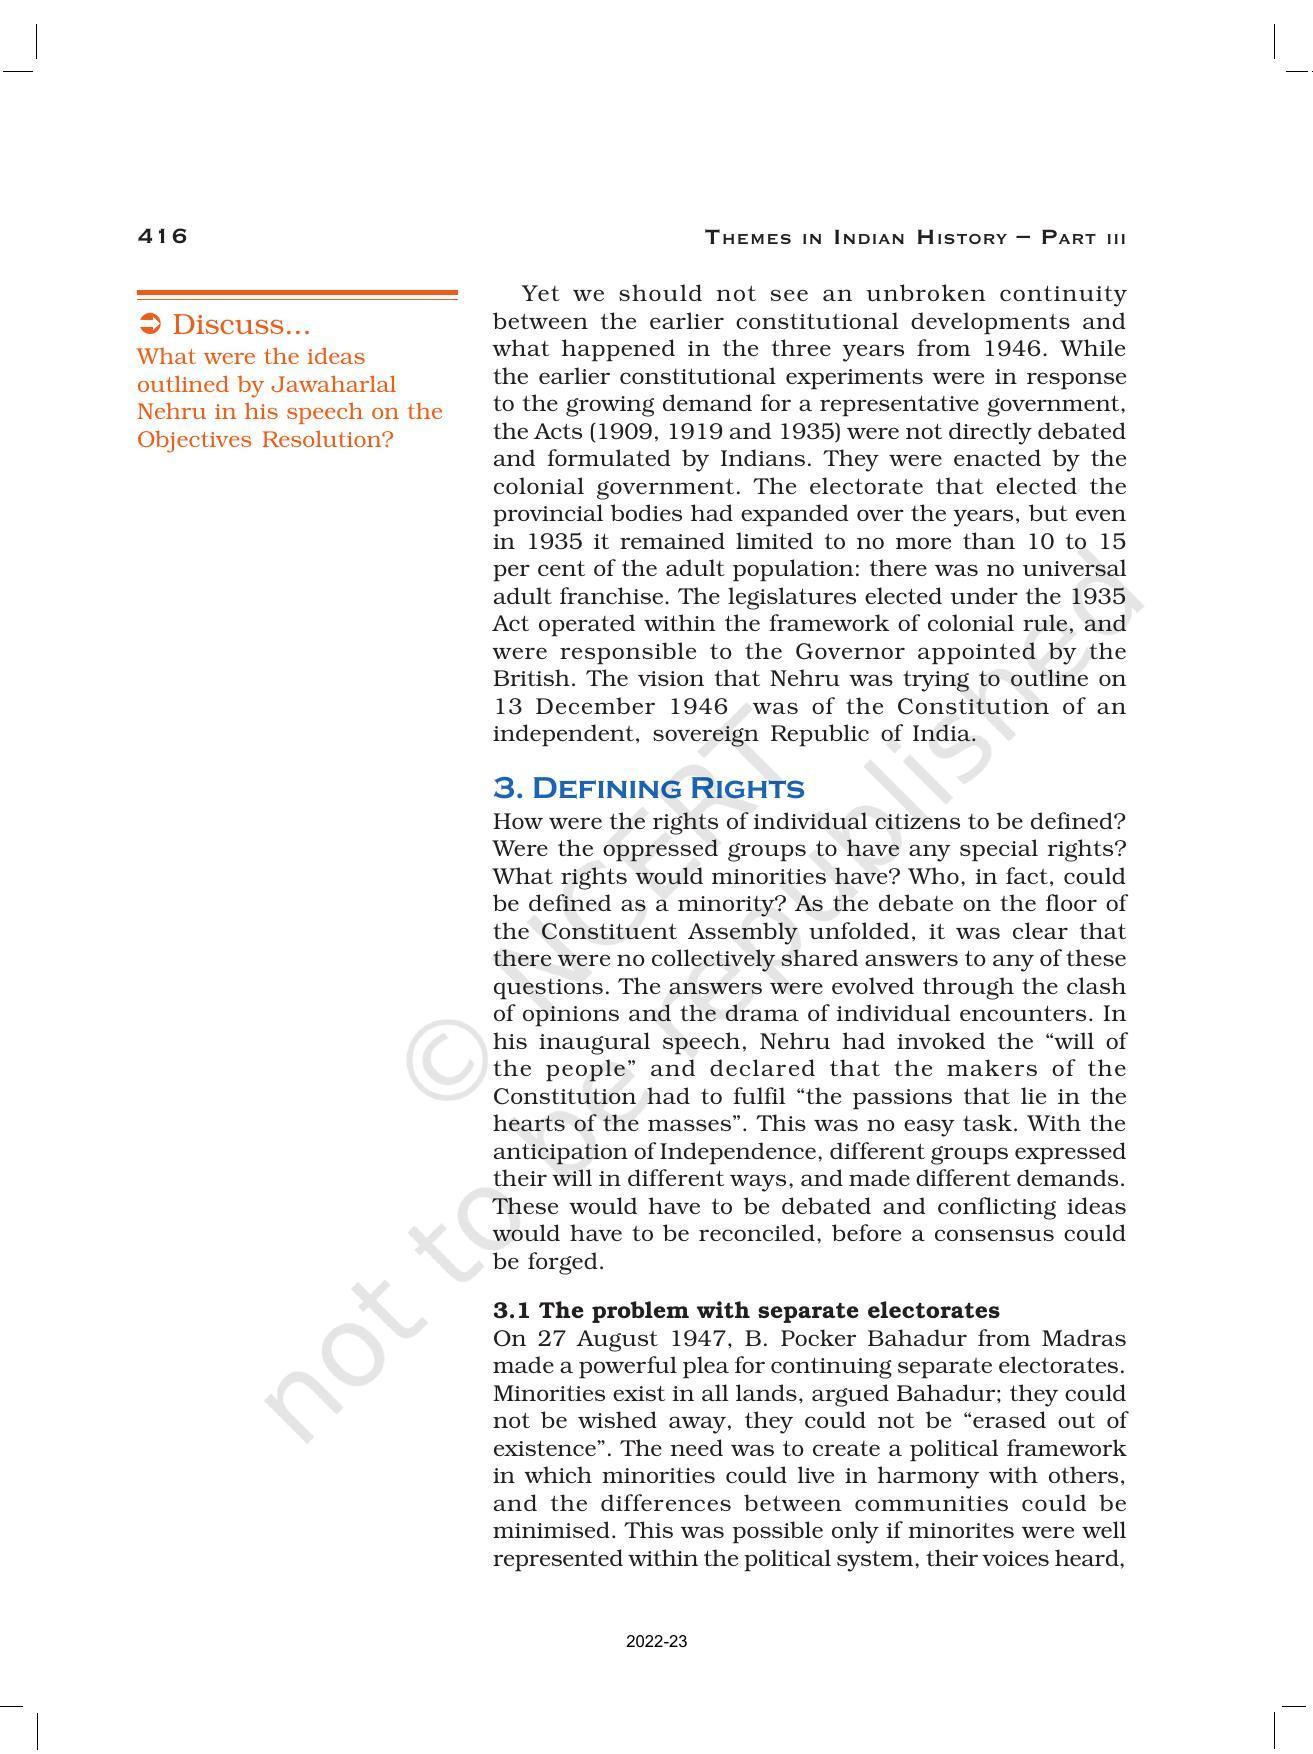 NCERT Book for Class 12 History (Part-III) Chapter 15 Framing and the Constitution - Page 12